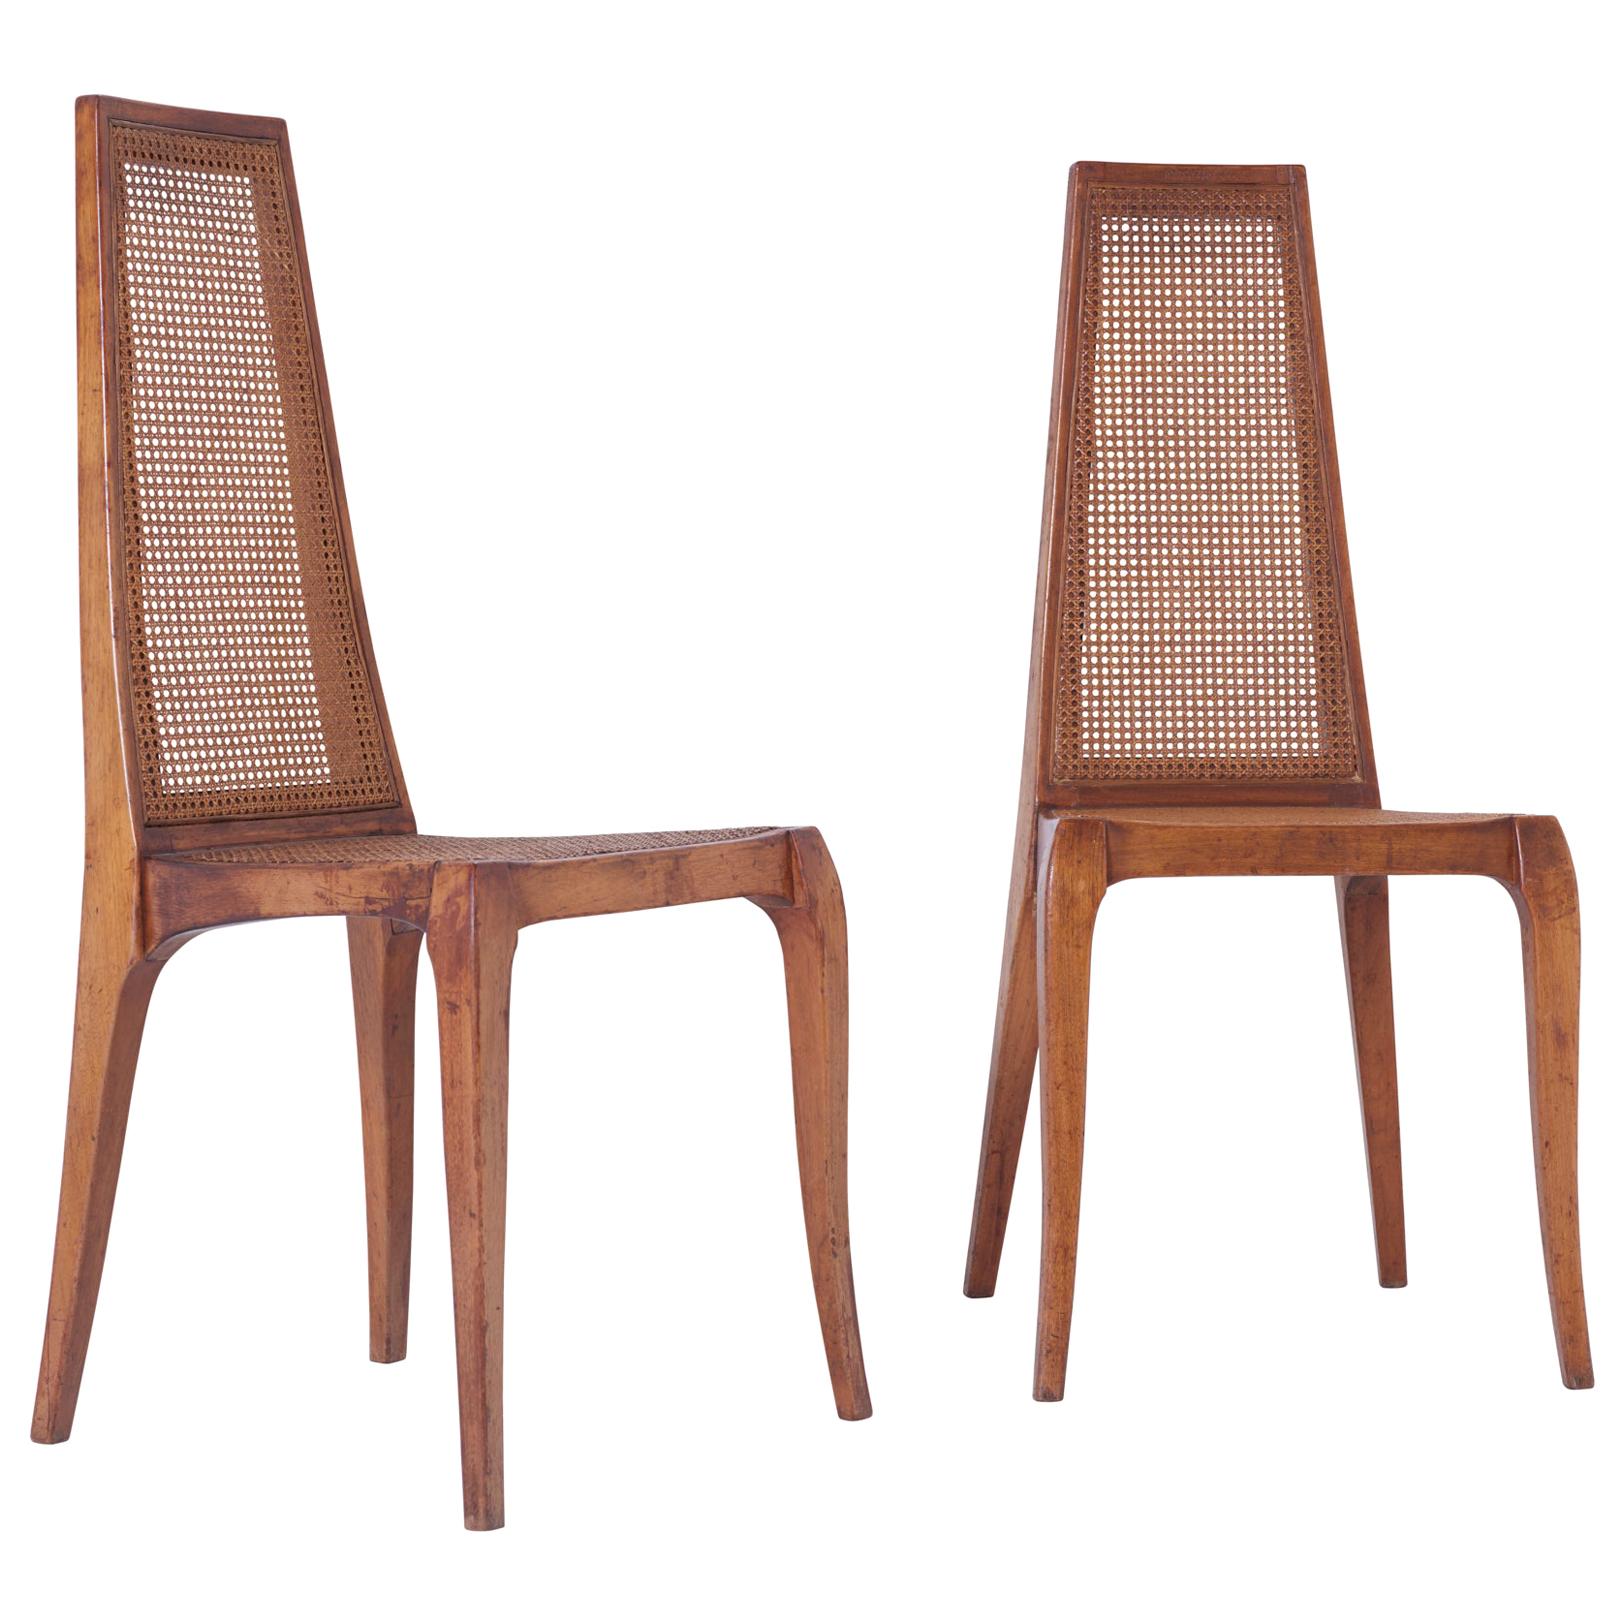 Pair of Mid-Century Modern Caned Chairs in Walnut, circa 1960